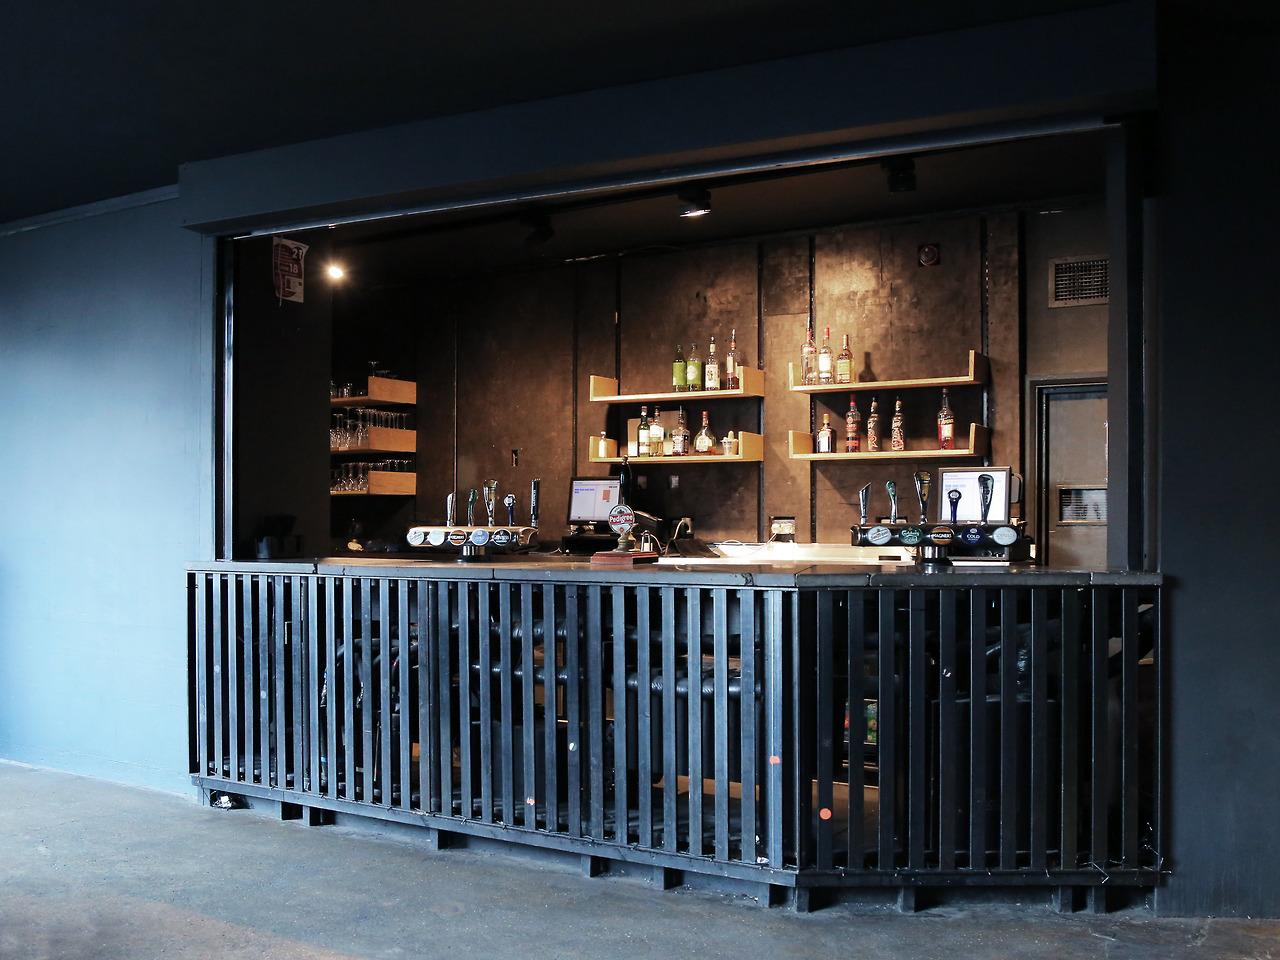 image of the 2016 ArtBar, minimalist dark look, with bar made of metal grating, concrete floor.